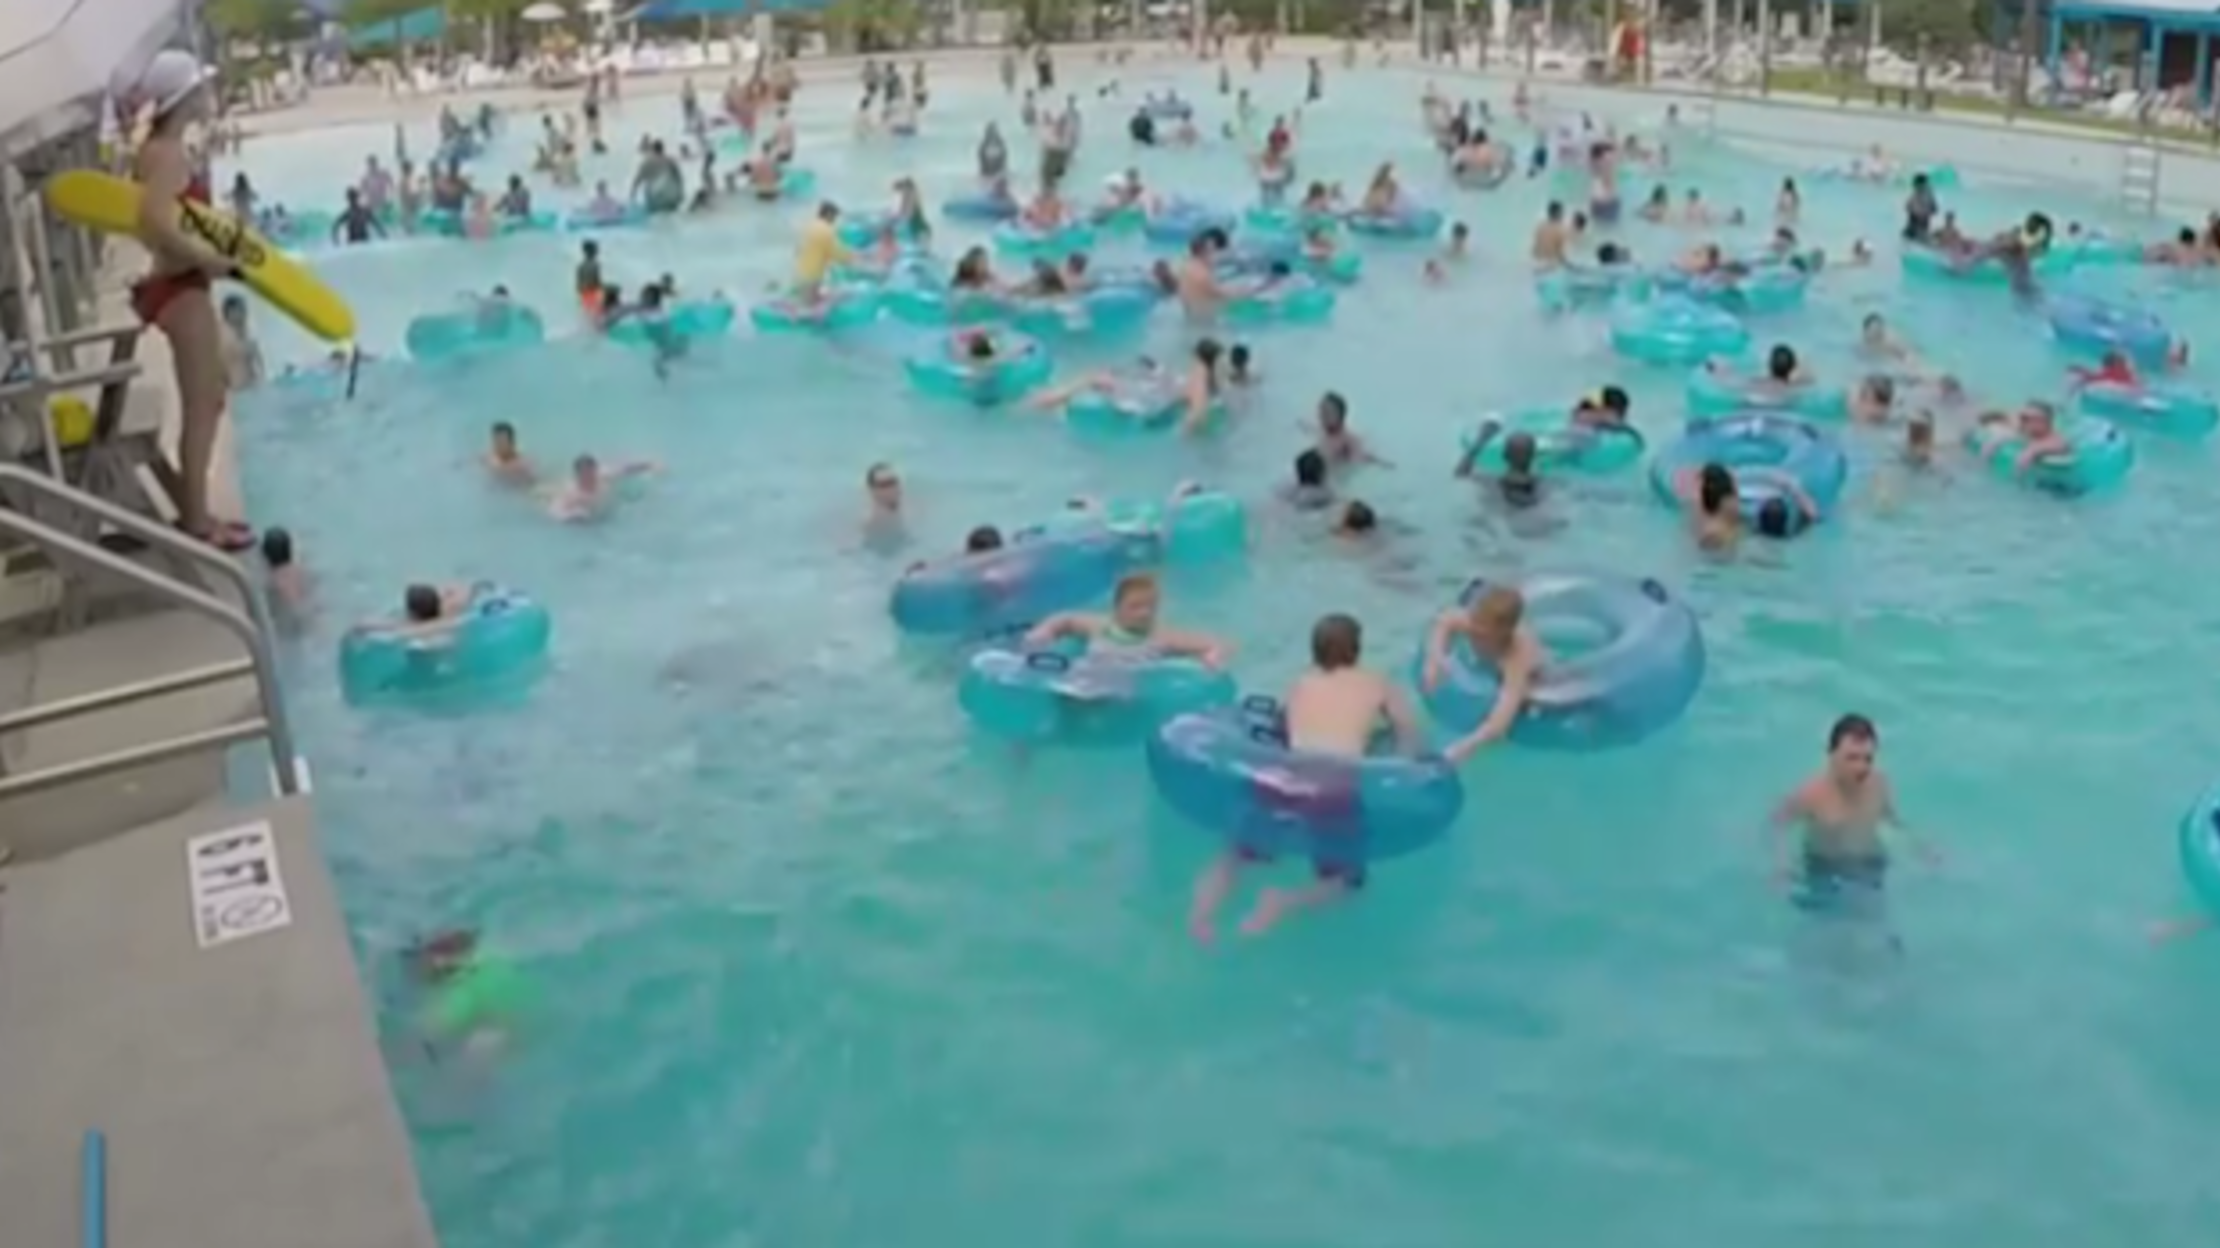 Lifeguard spots drowning child in sea of people in amazing 